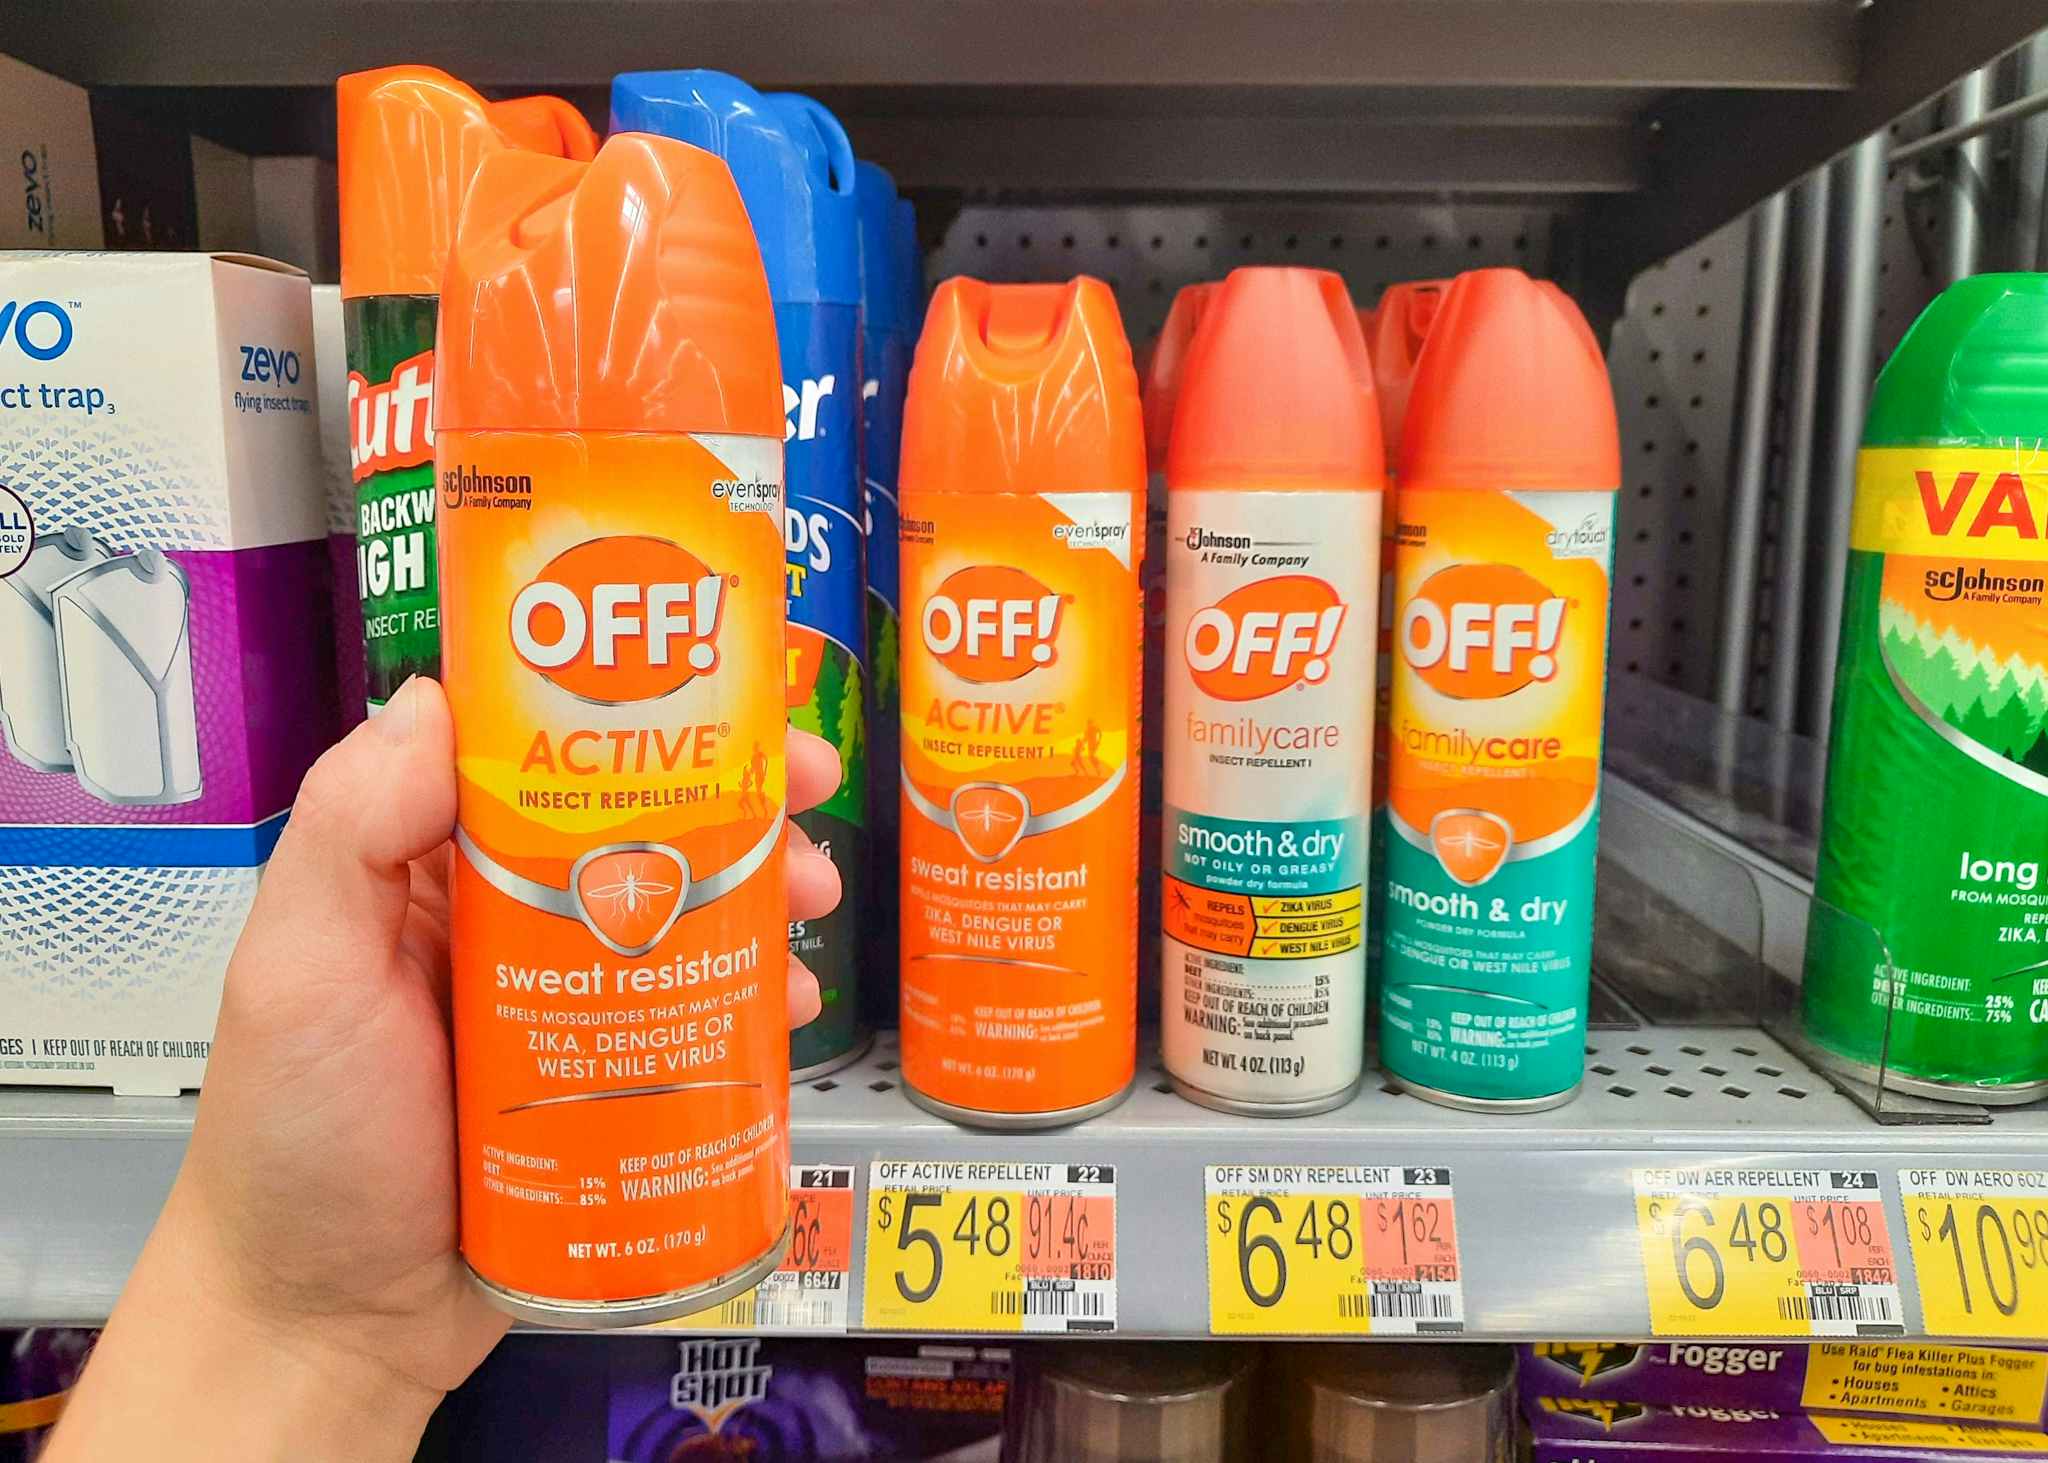 Off! Active Insect Repellent held in front of shelf at Walmart